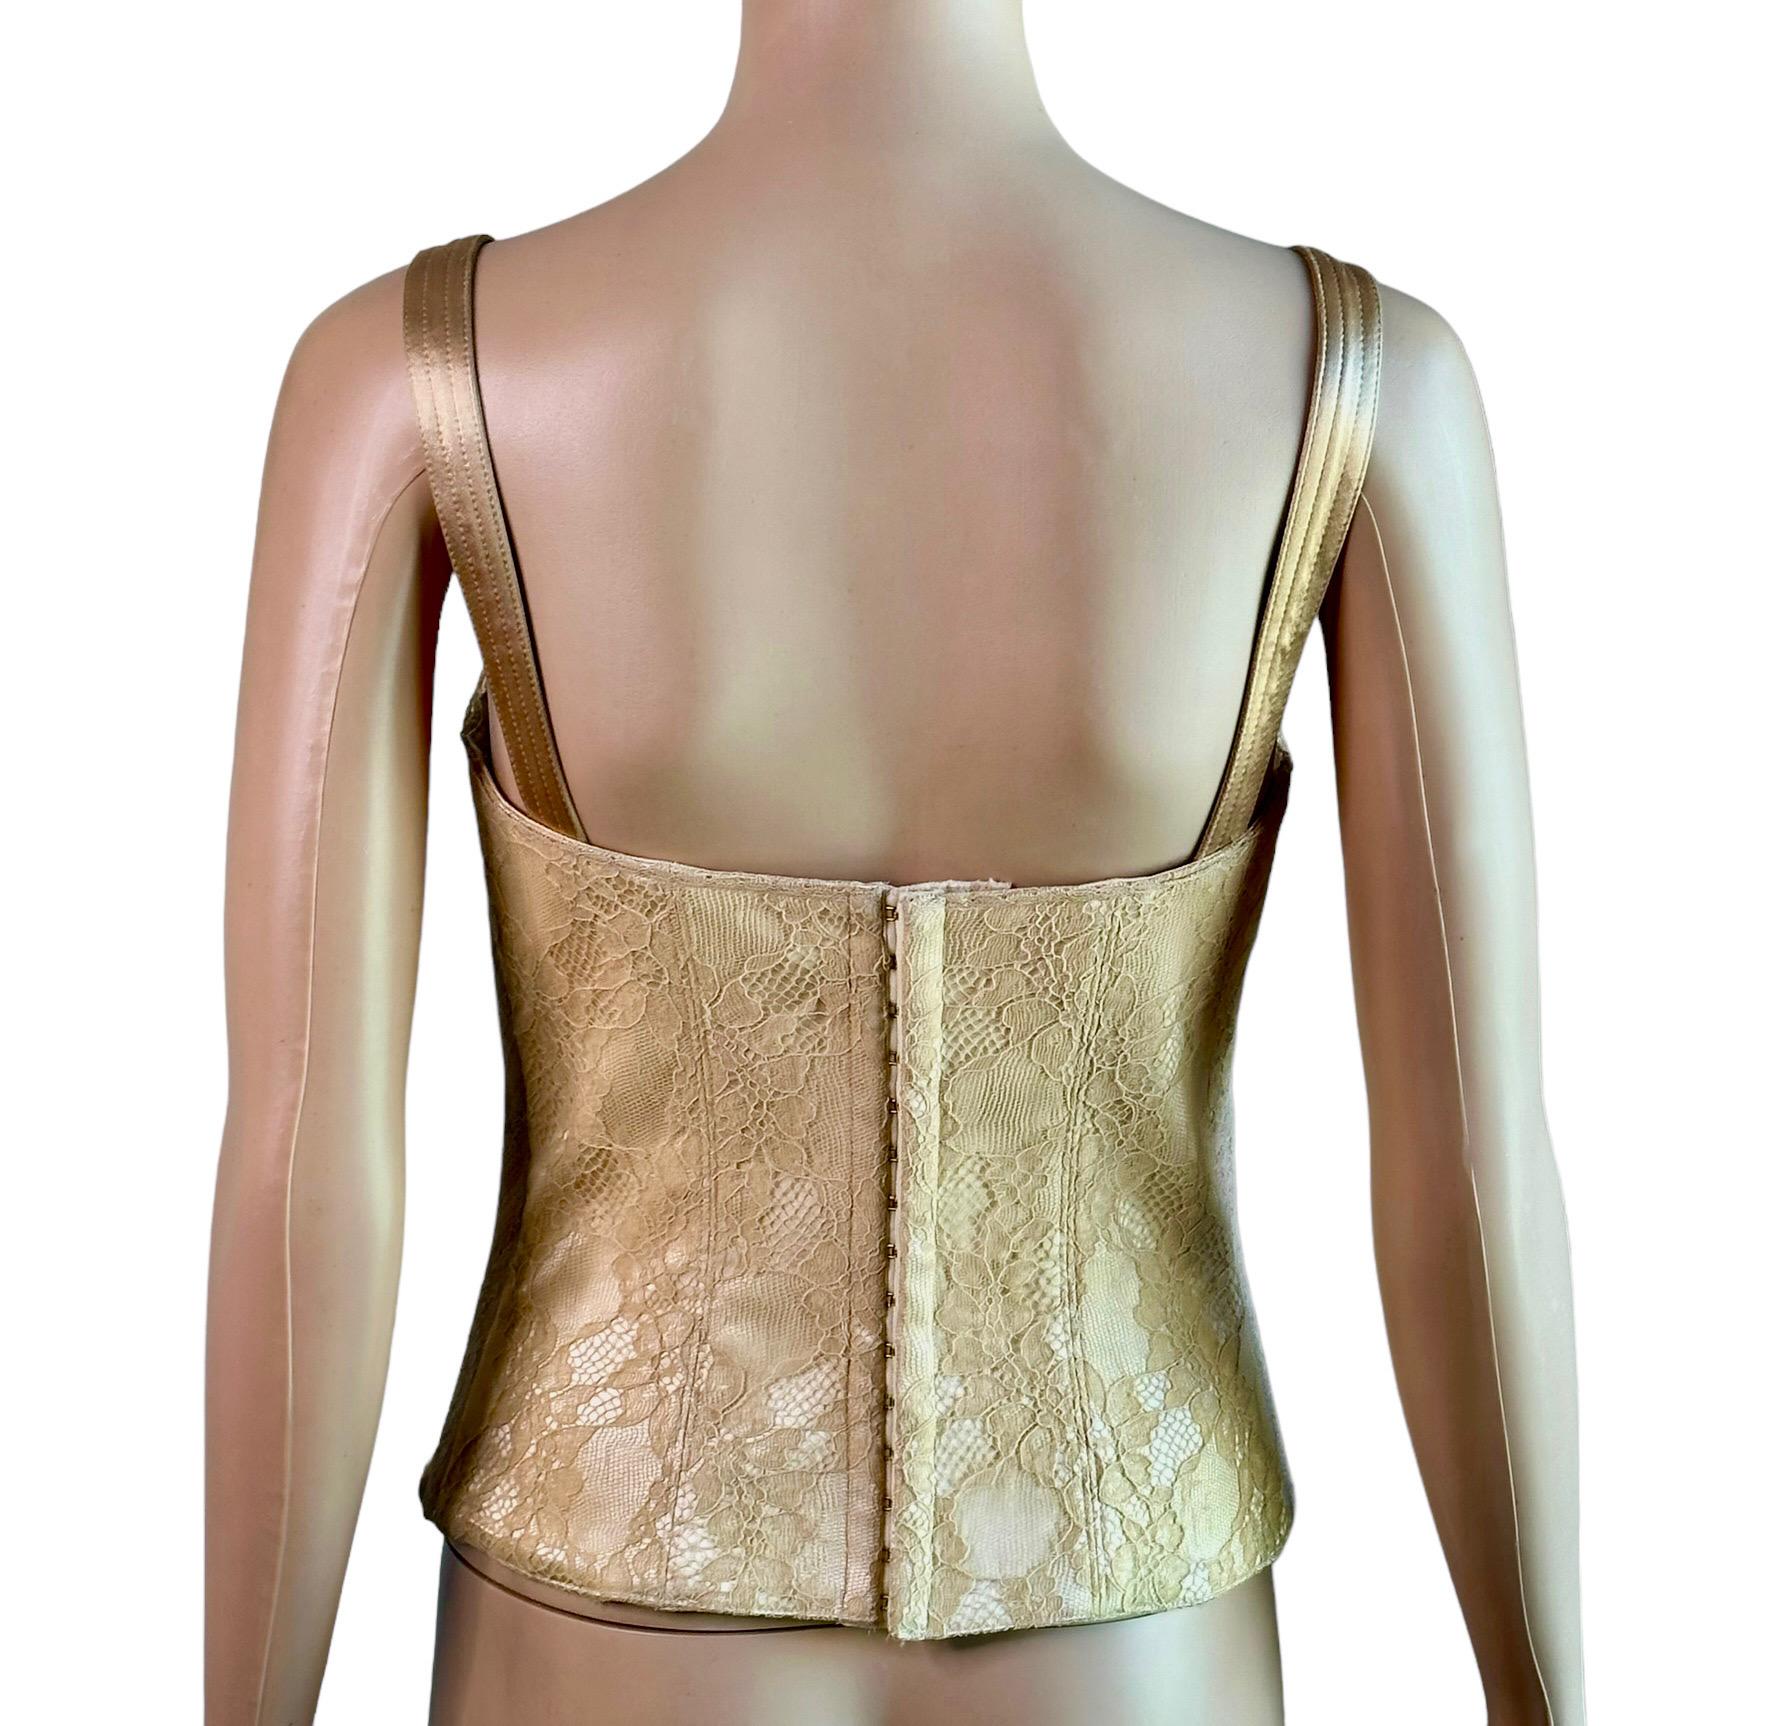 Christian Dior By John Galliano S/S 2004 Runway Bustier Lace Corset Crop Top In Good Condition For Sale In Naples, FL